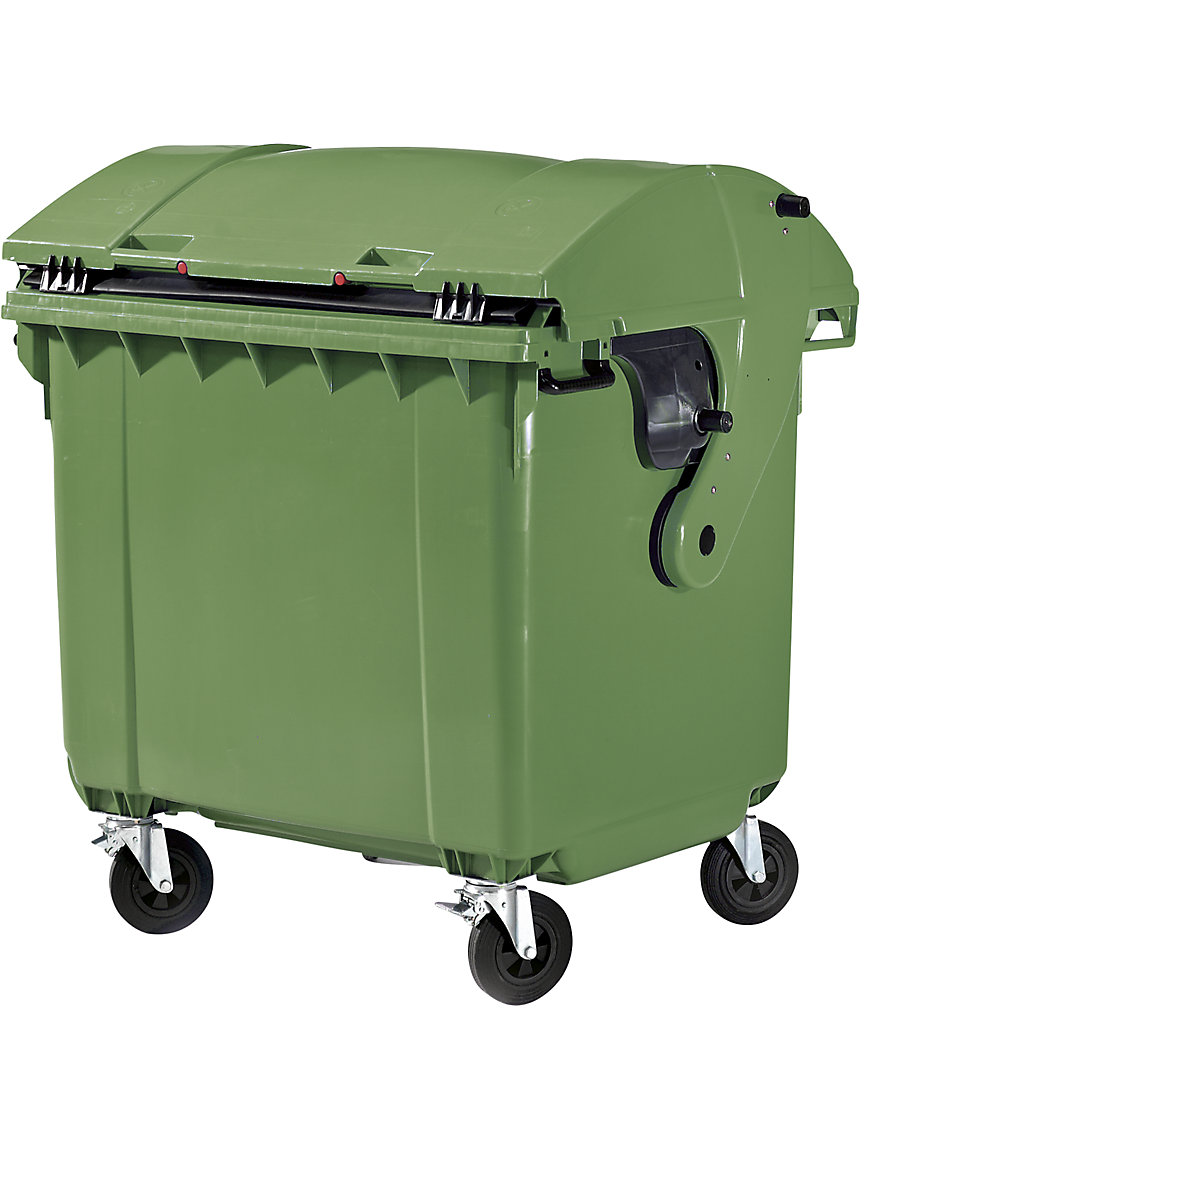 Plastic waste container, DIN EN 840, capacity 1100 l, WxHxD 1360 x 1465 x 1100 mm, sliding lid, child lock, green-4